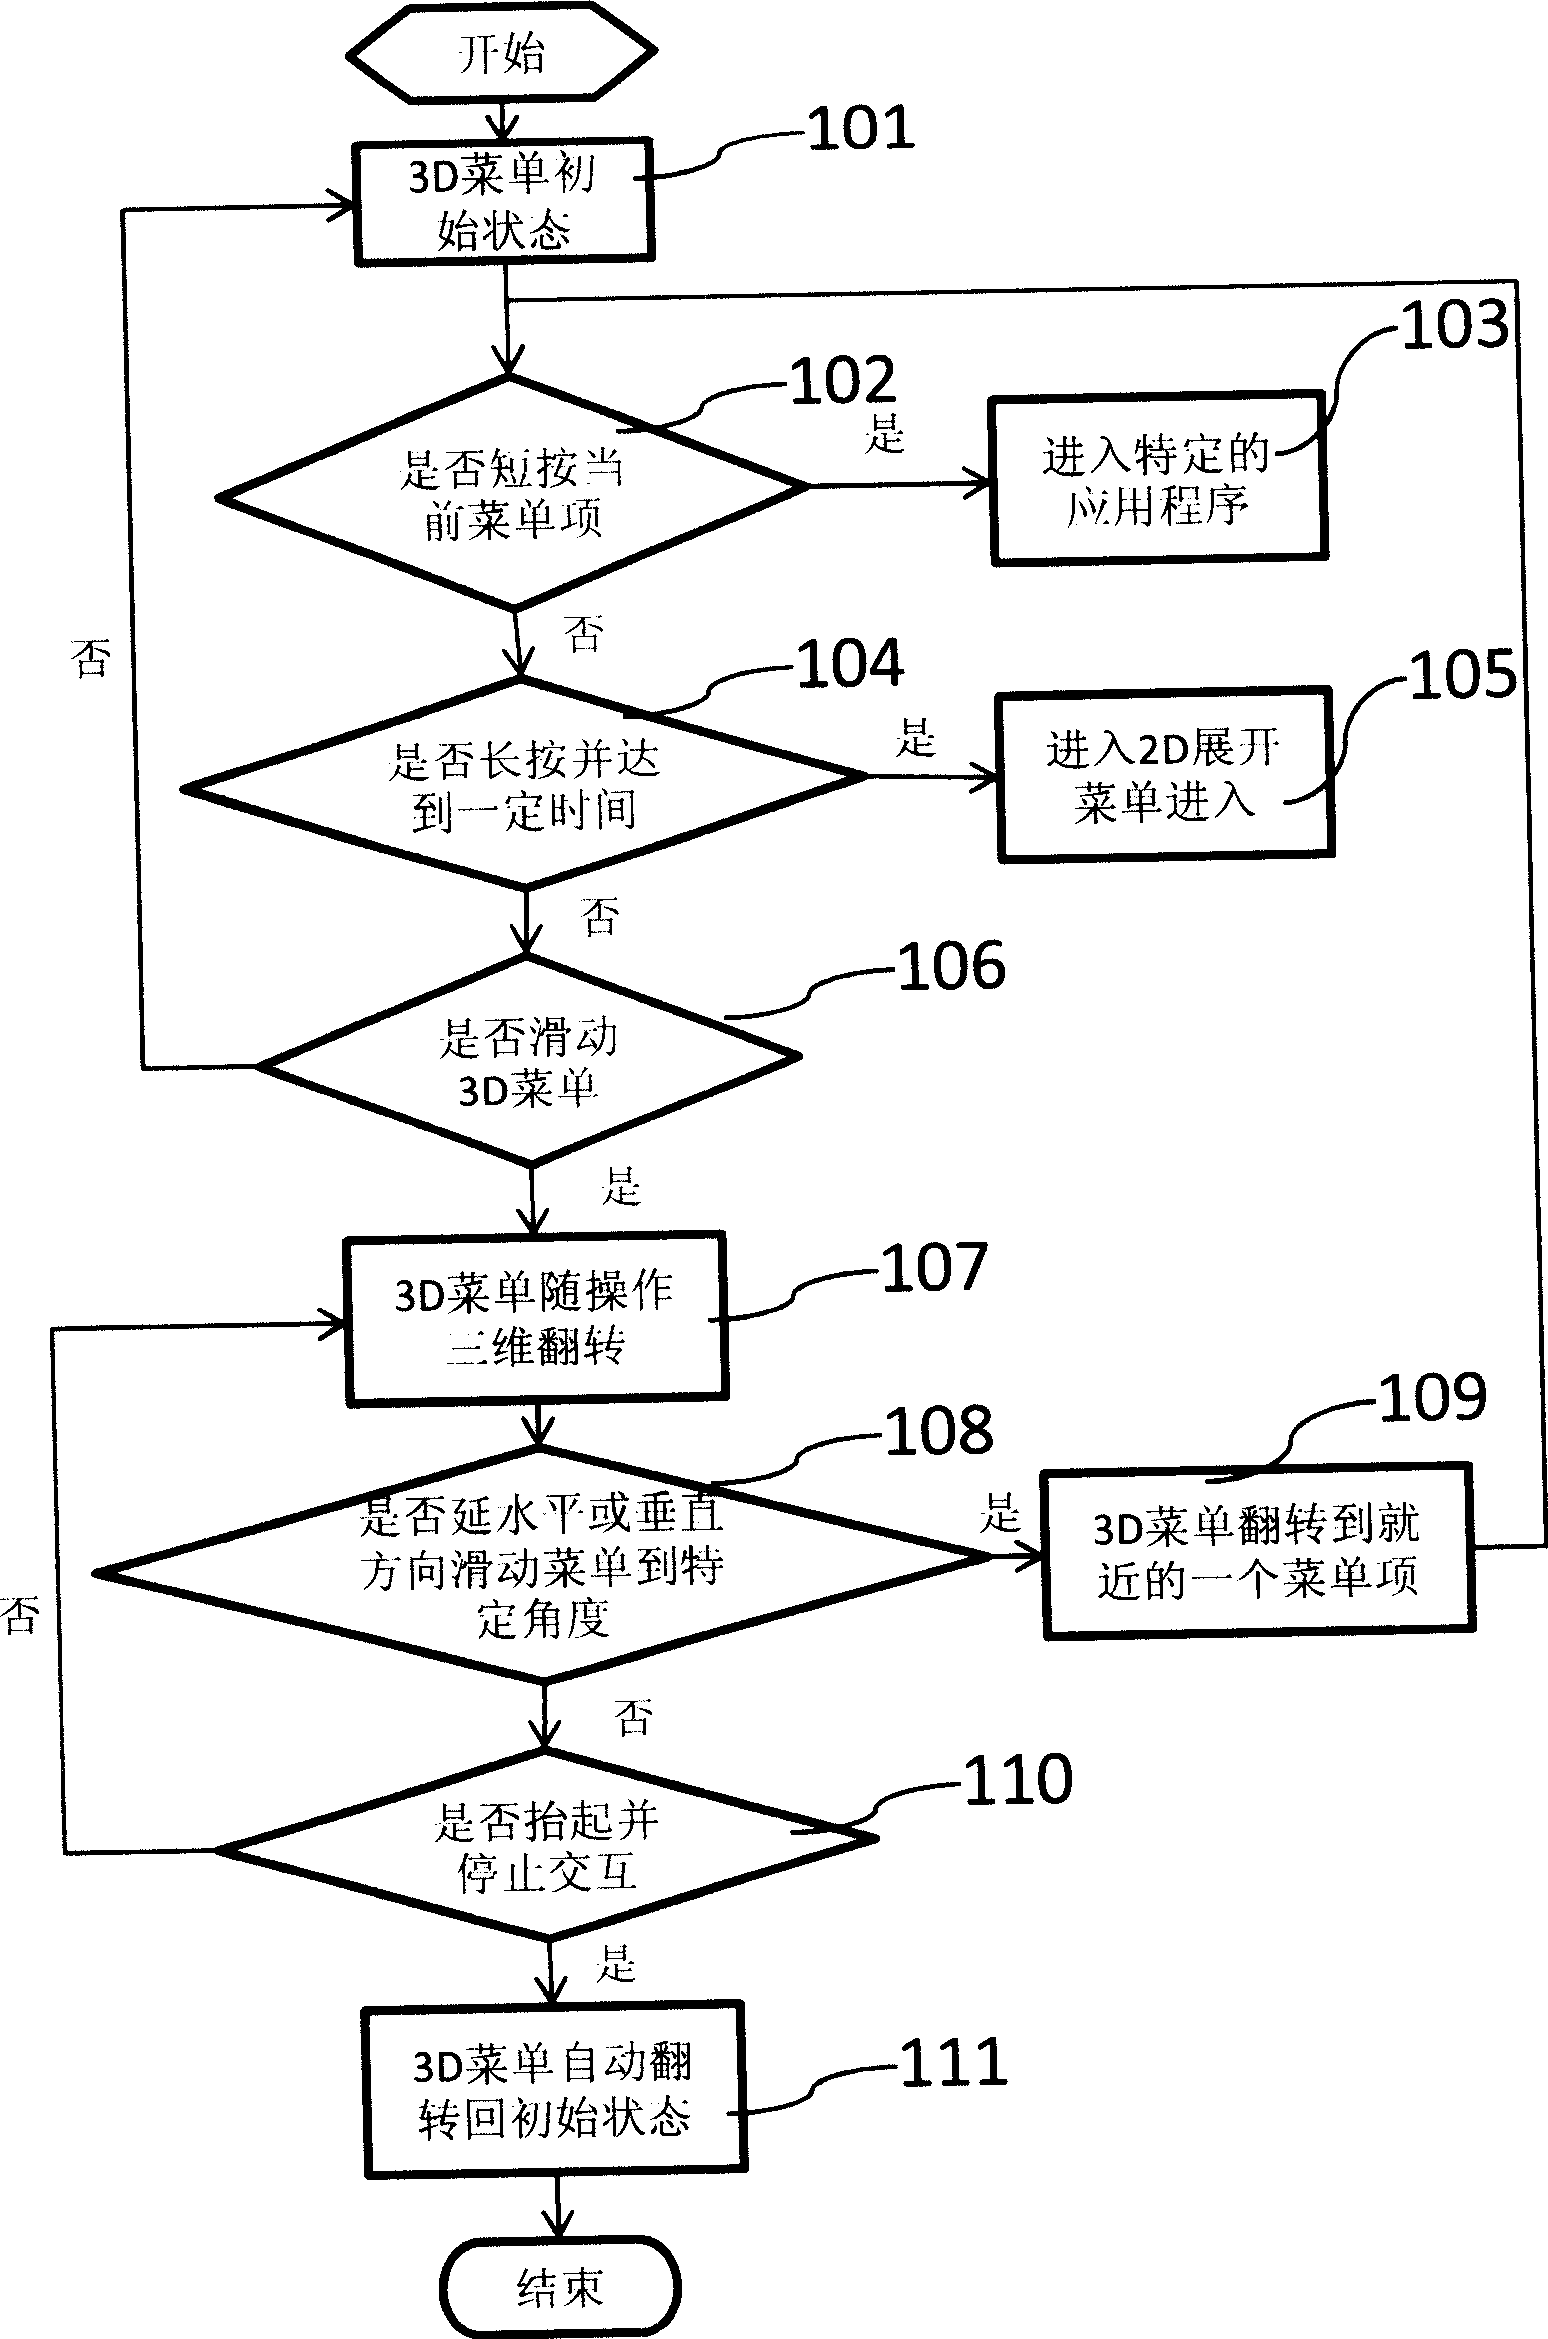 Apparatus and method for implementing three-dimension interaction on mobile phone